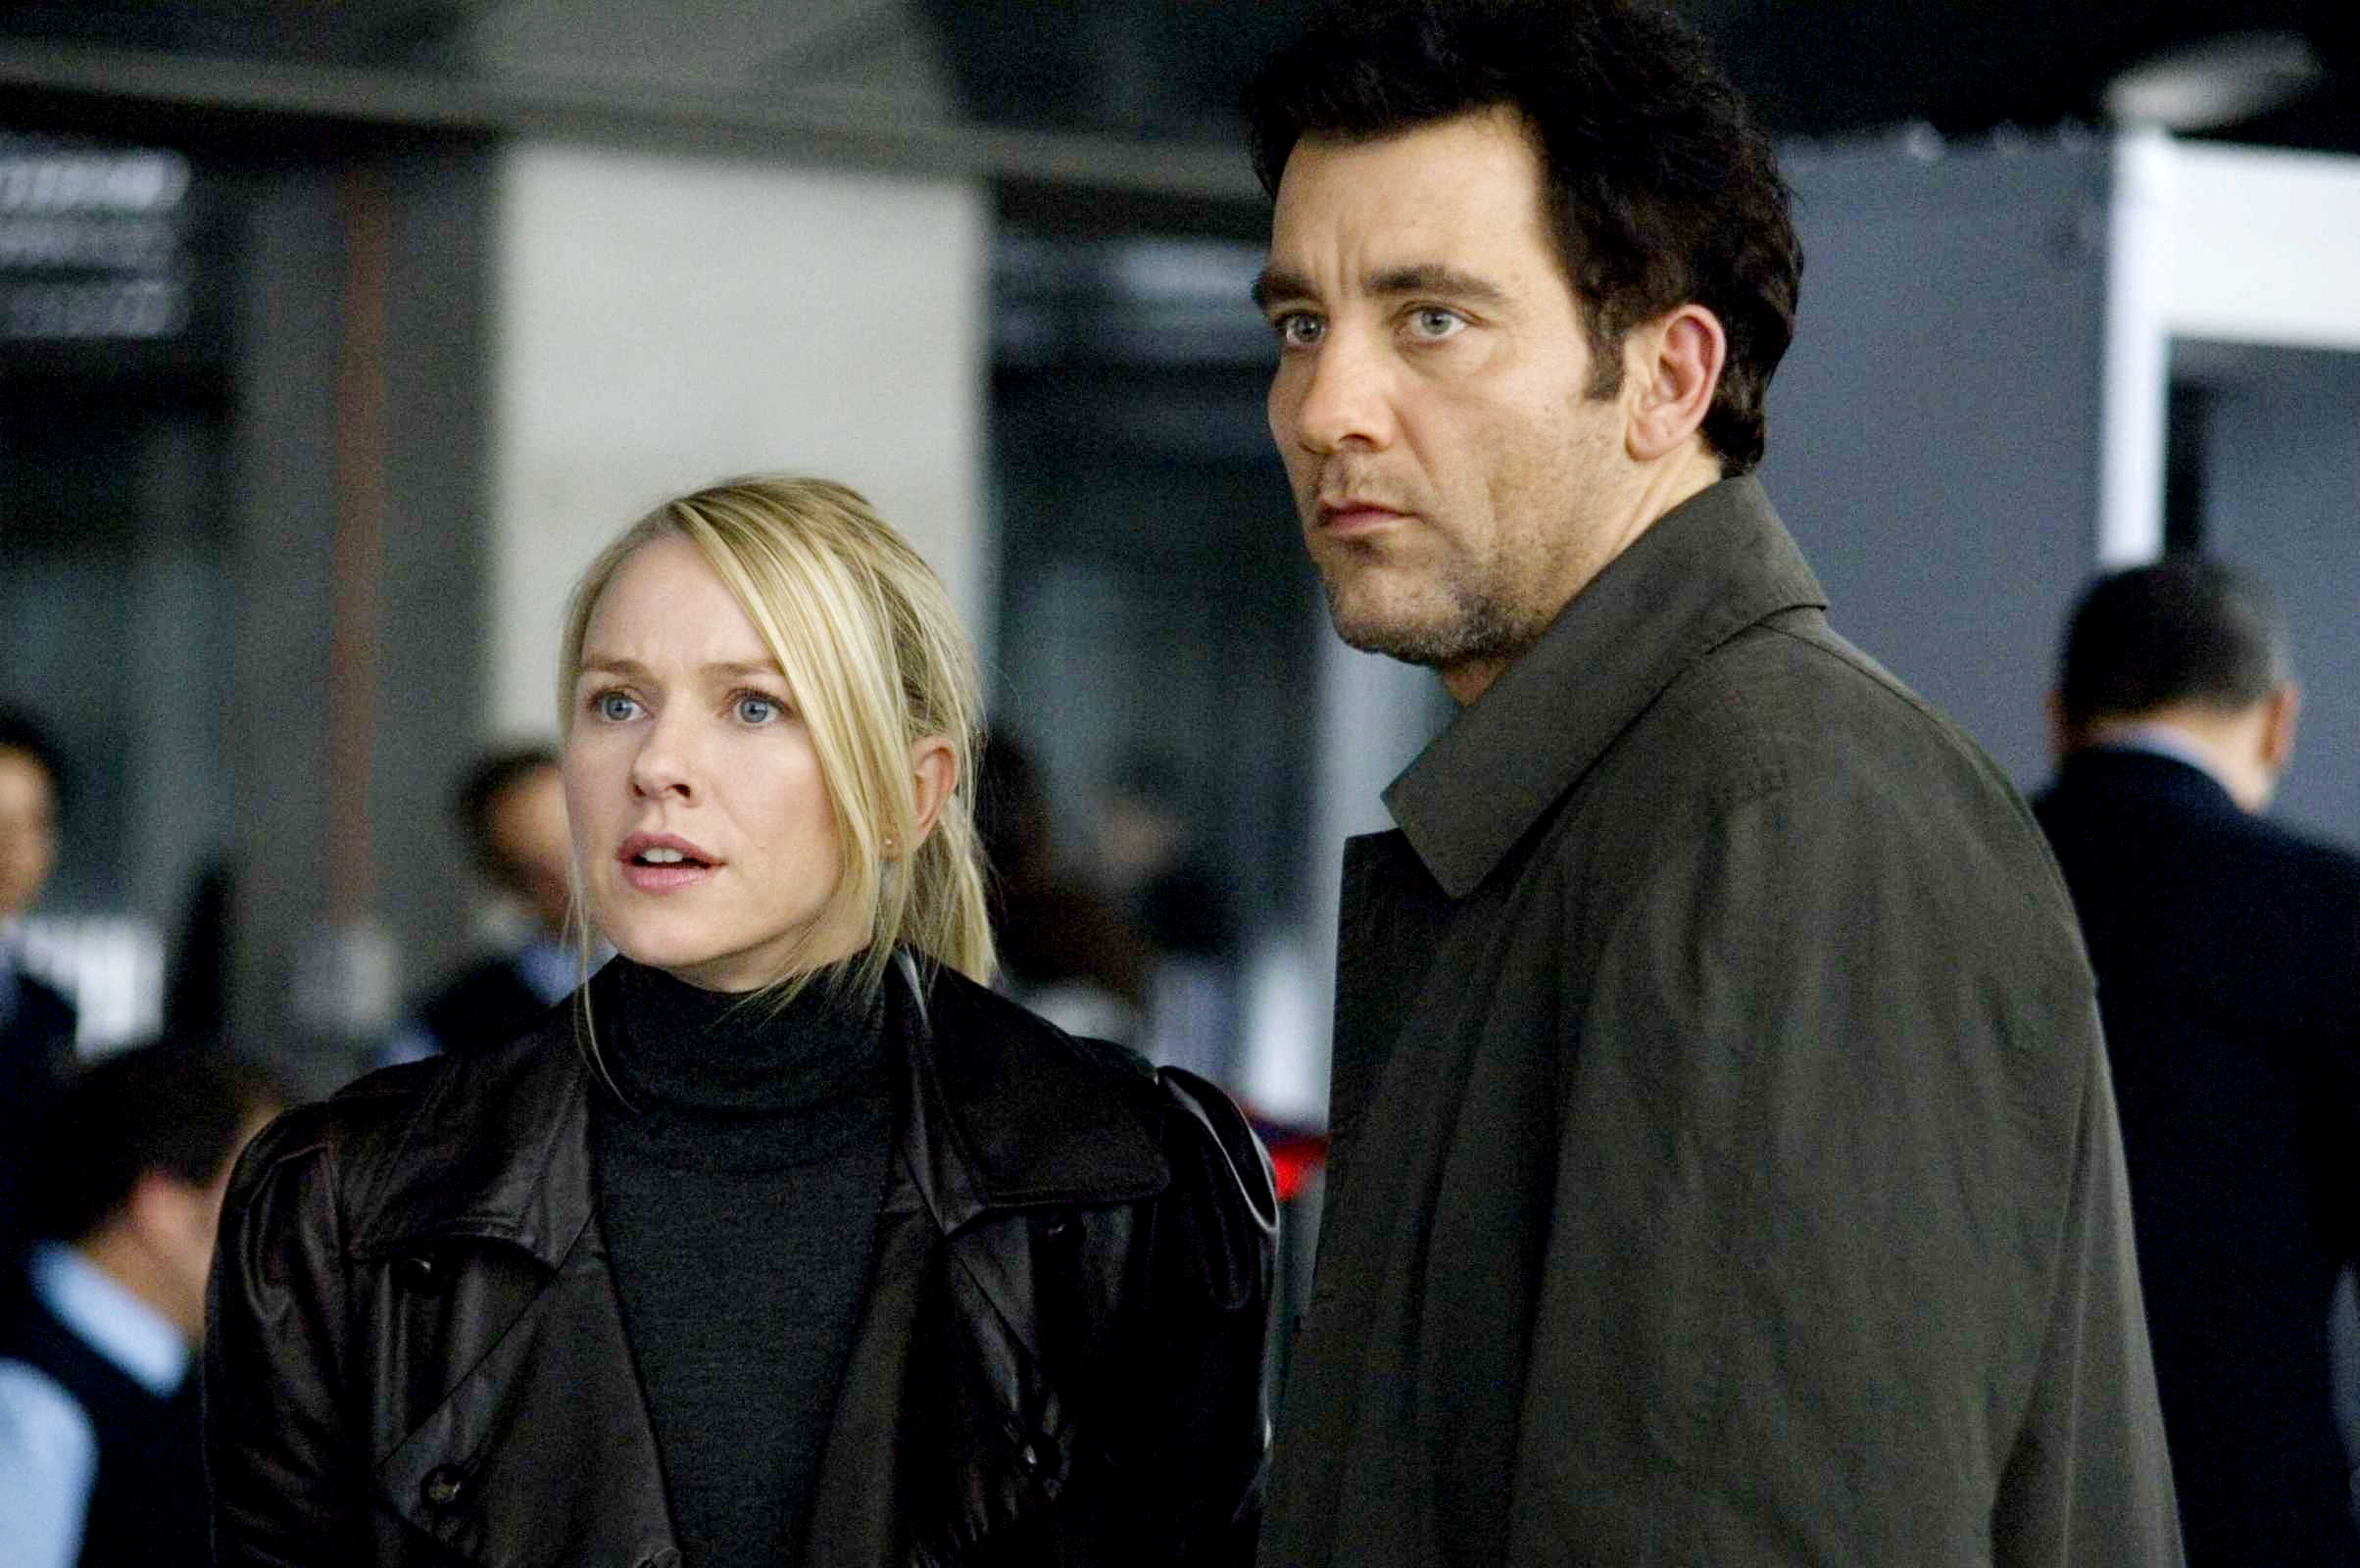 Naomi Watts stars as Eleanor Whitman and Clive Owen stars as Louis Salinger in Columbia Pictures' The International (2009). Photo credit by Jay Maidment.